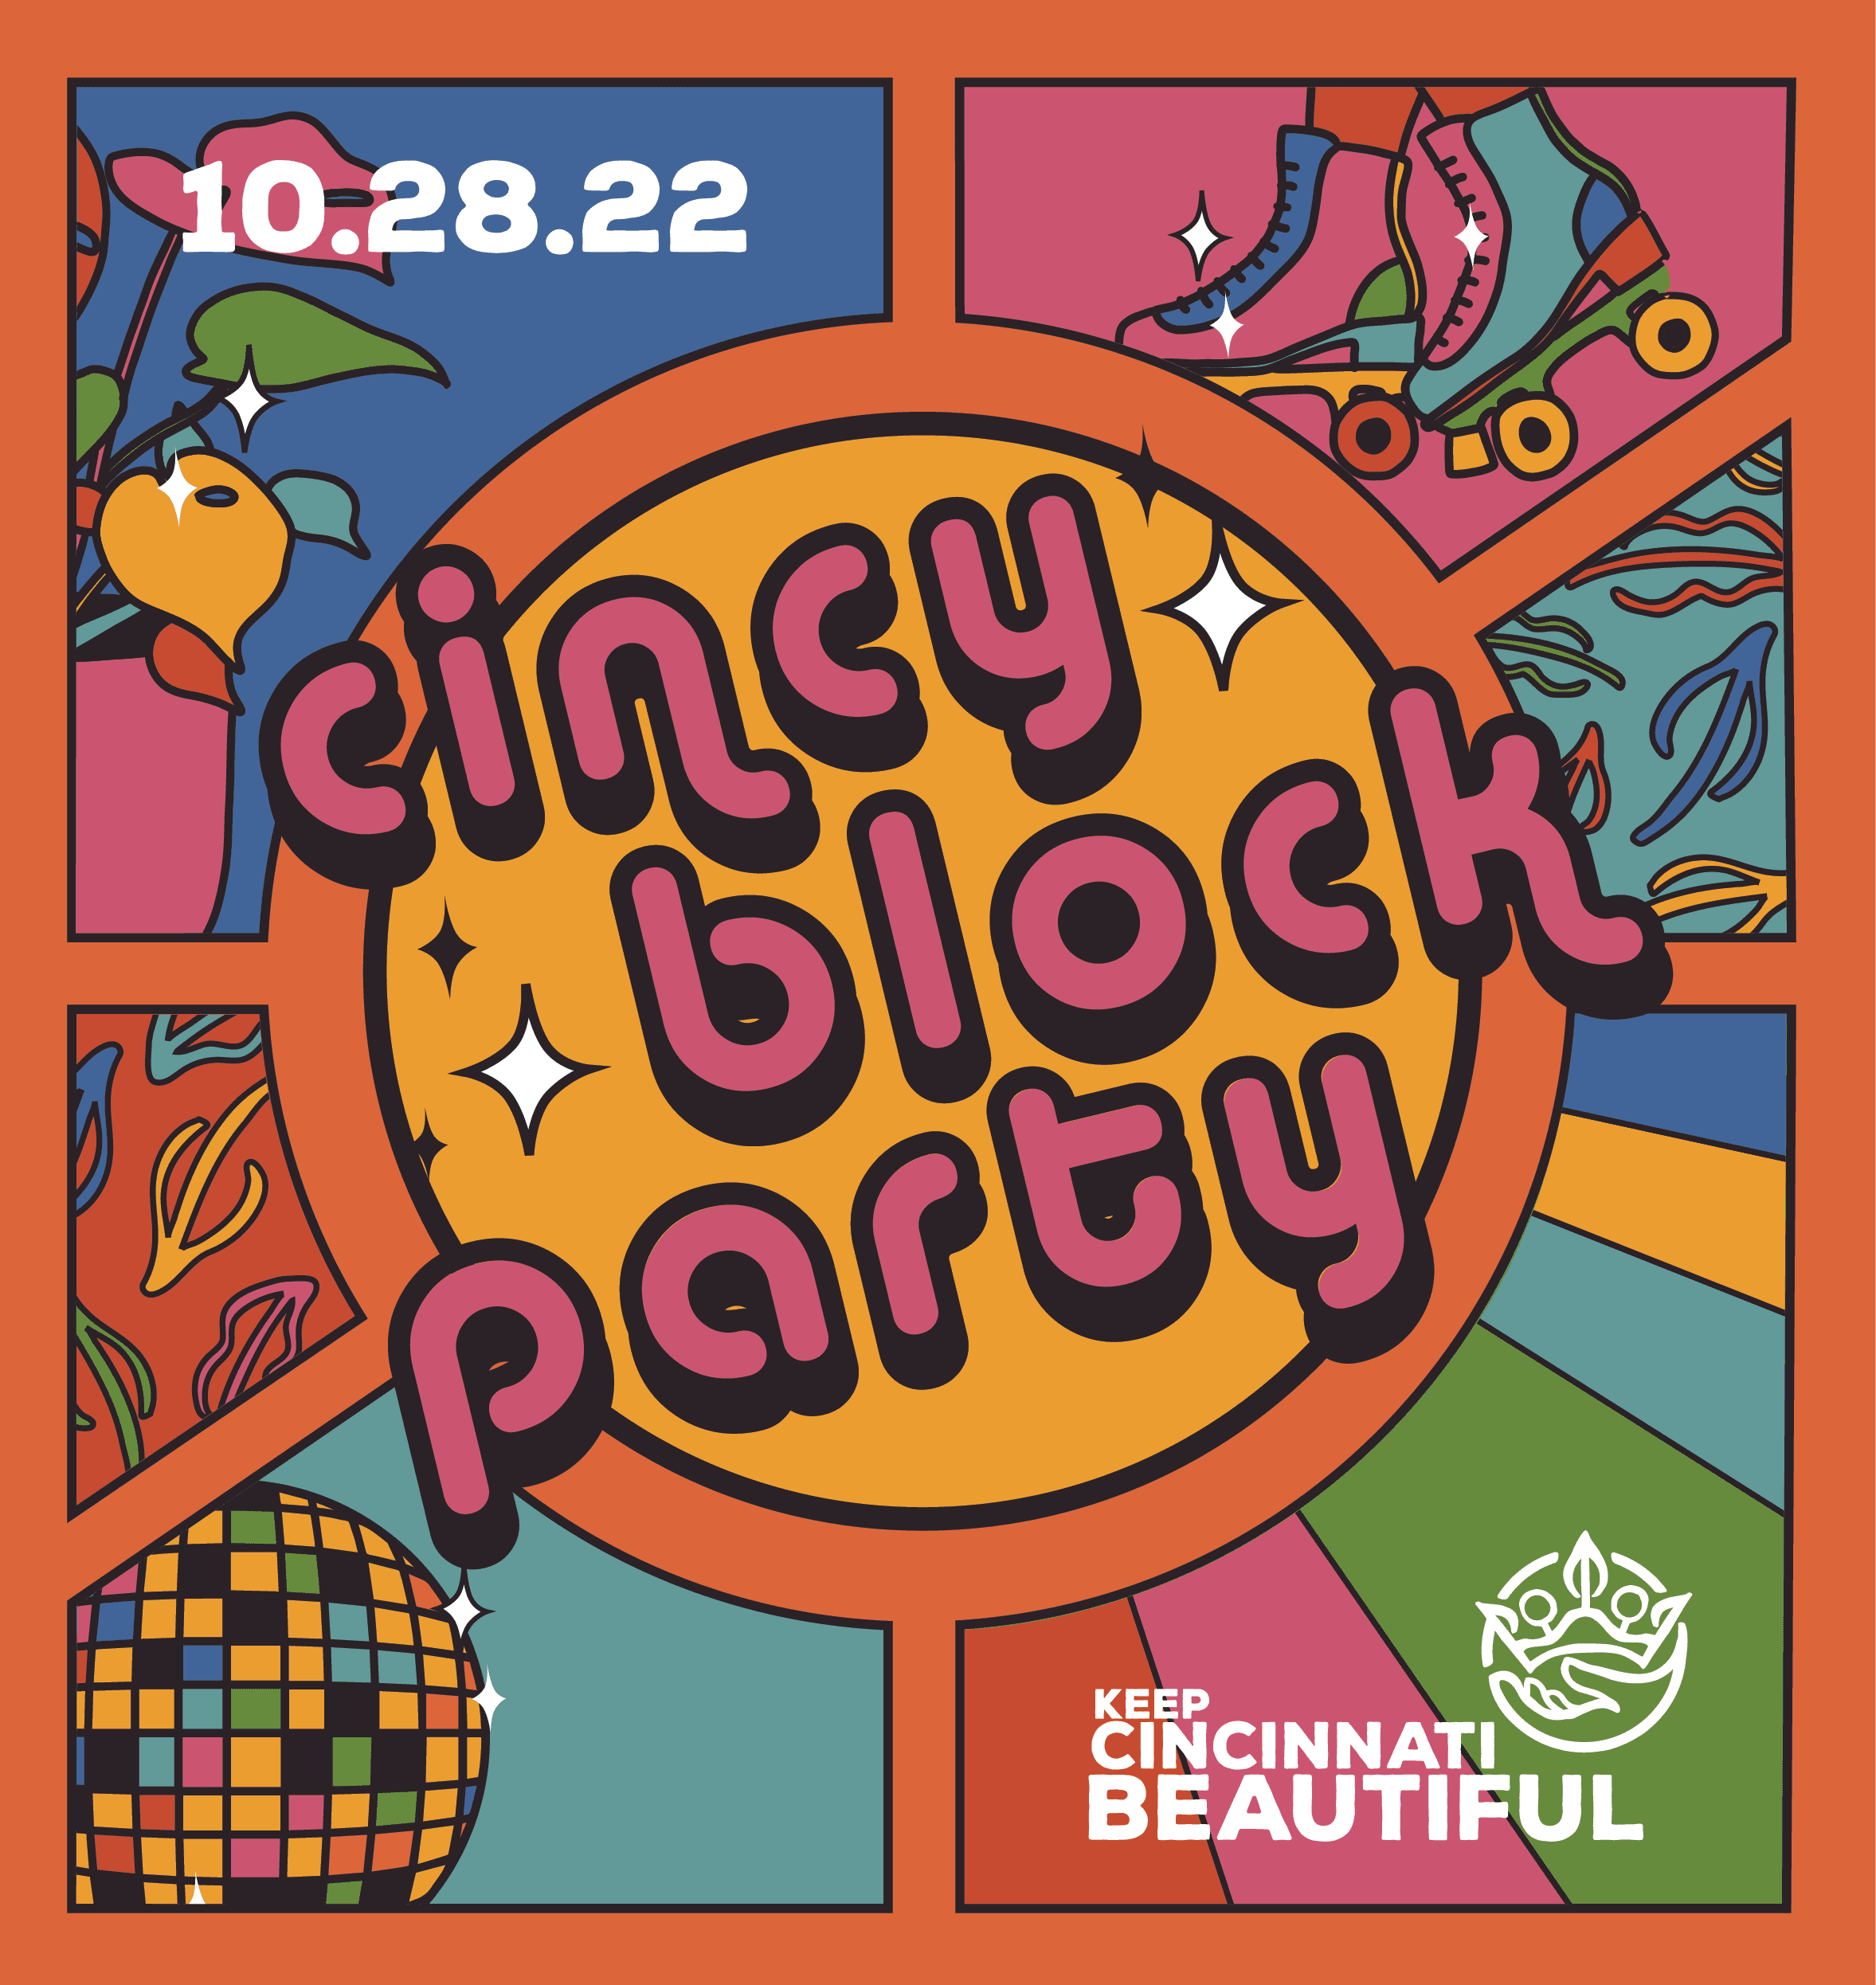 Get Your Groove on at the Cincy Block Party!